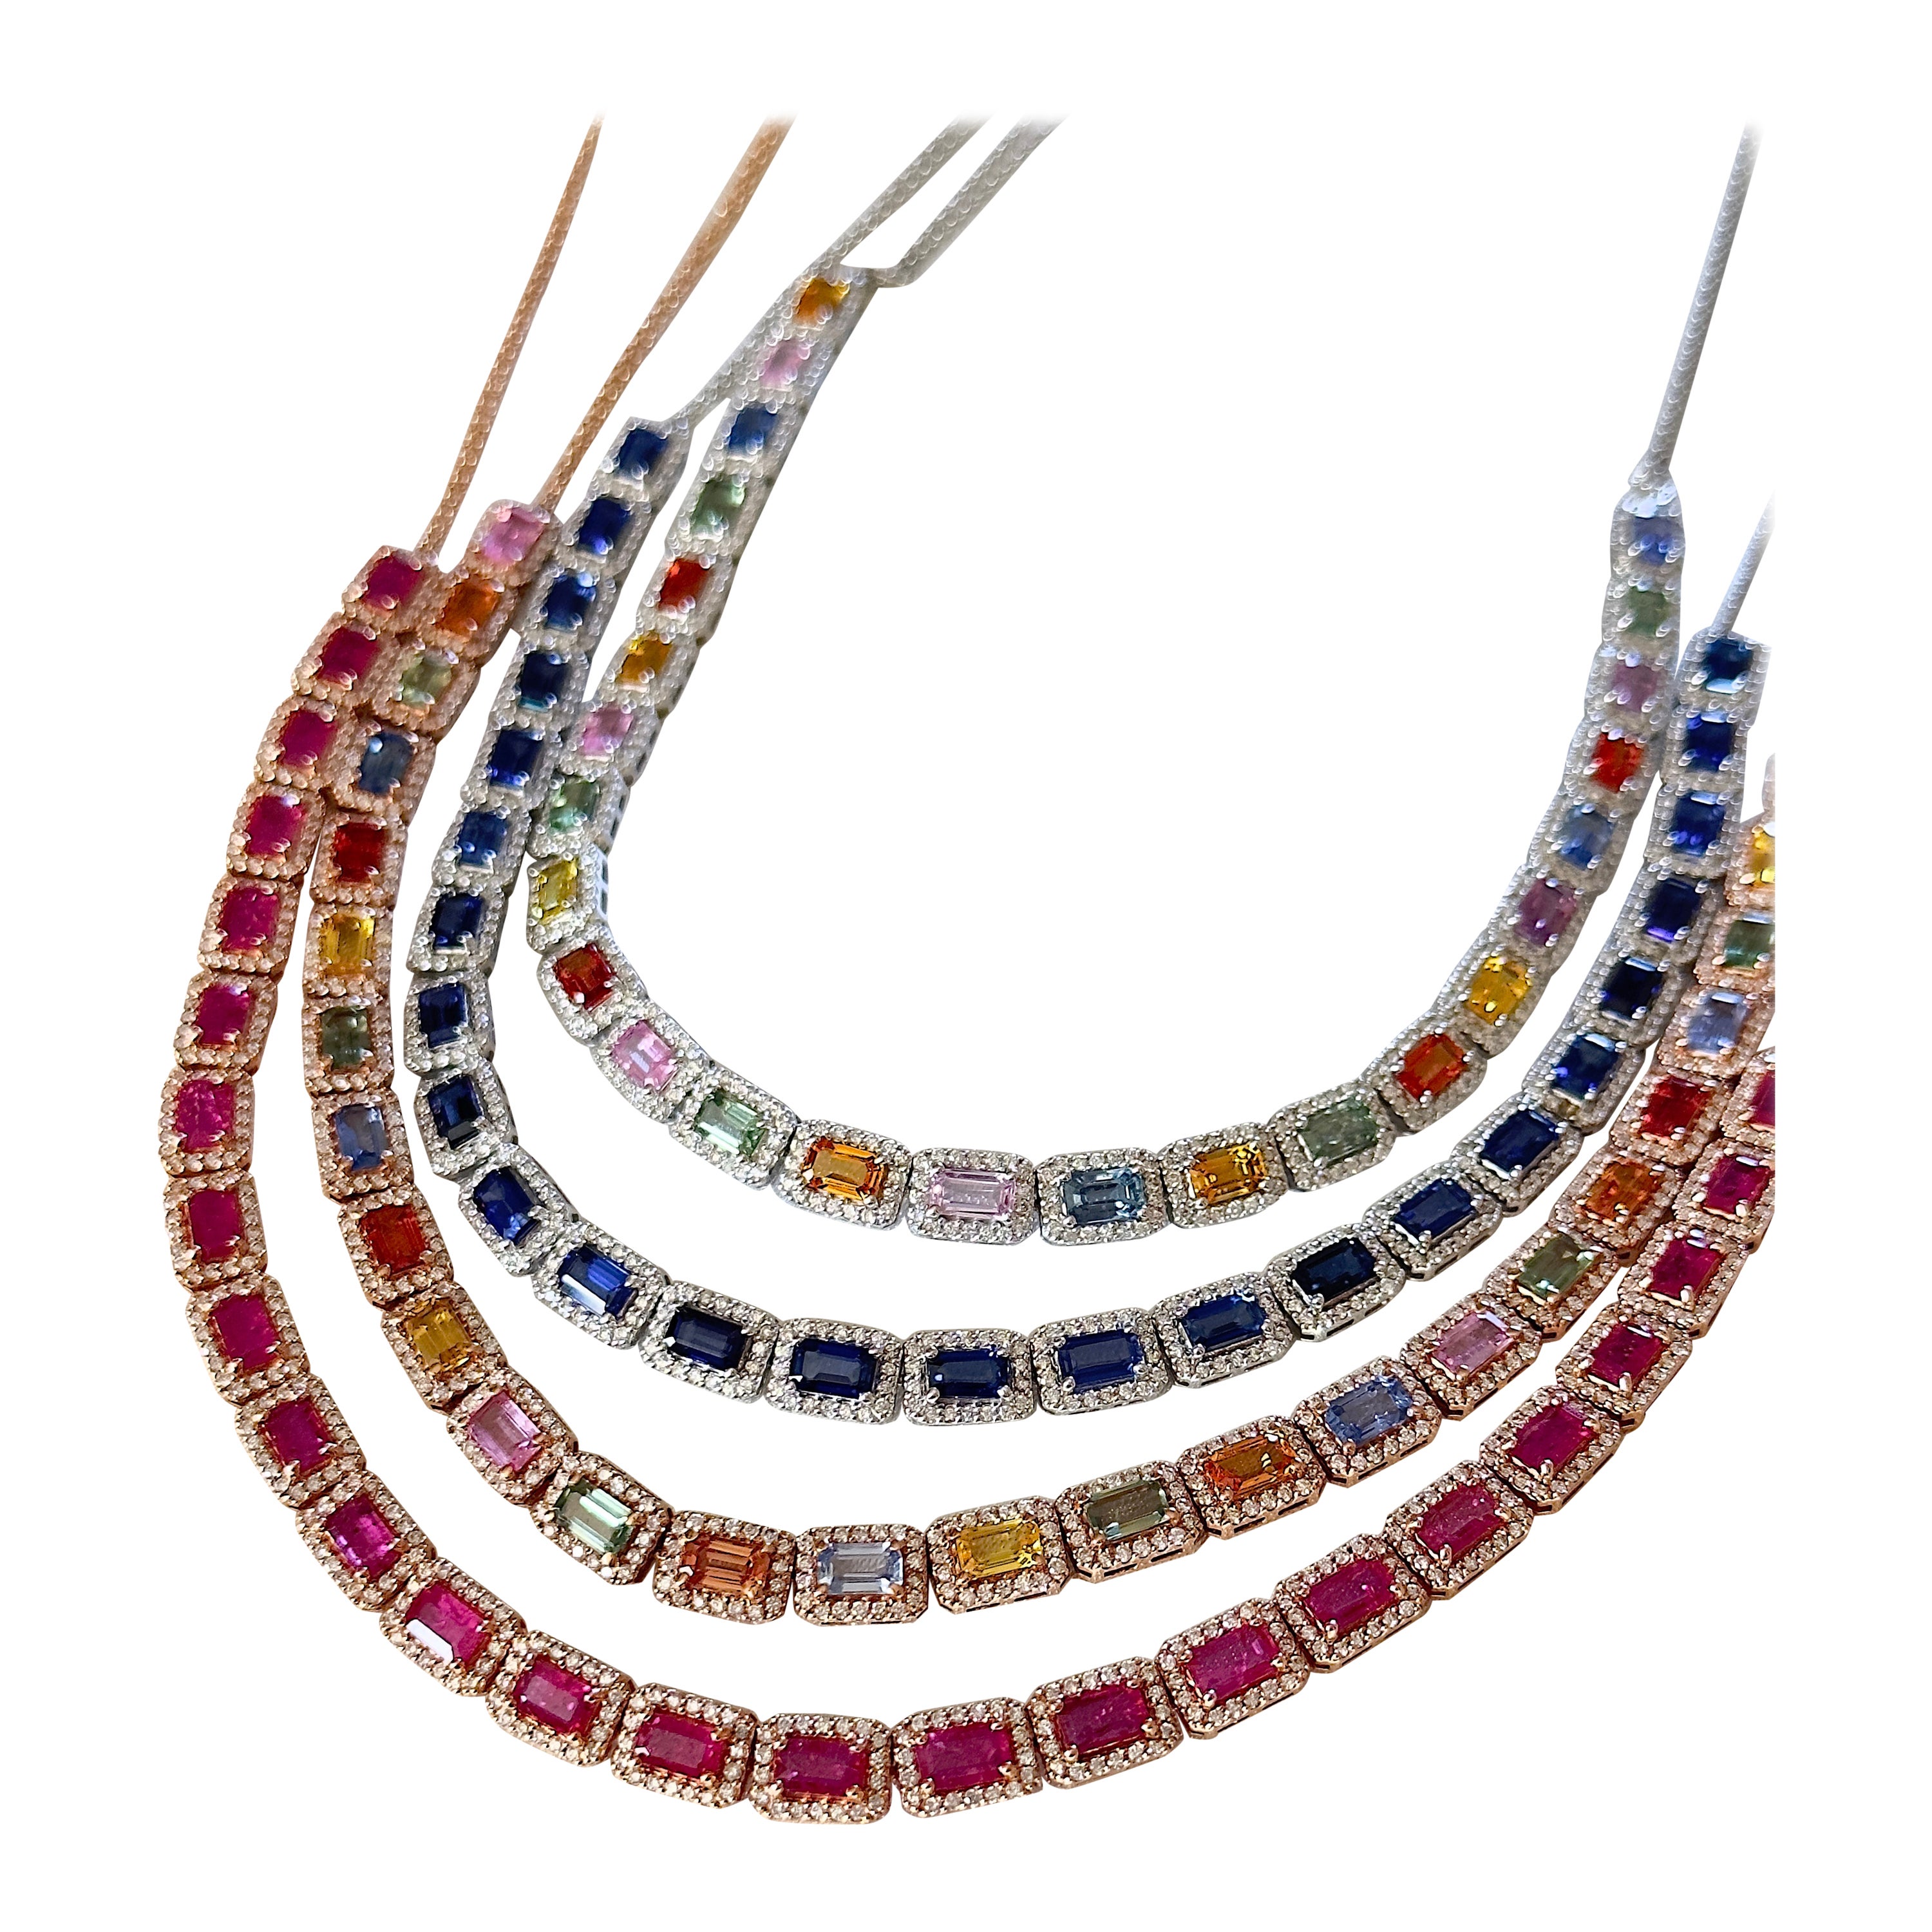 Our new Gemstone Chokers are here! We have options in Rainbow Sapphire, Blue Sapphire, and Ruby! The rainbow sapphires set in both white gold and rose gold are drop dead gorgeous and waiting to be worn! Each stone is carefully handpicked, assorted,